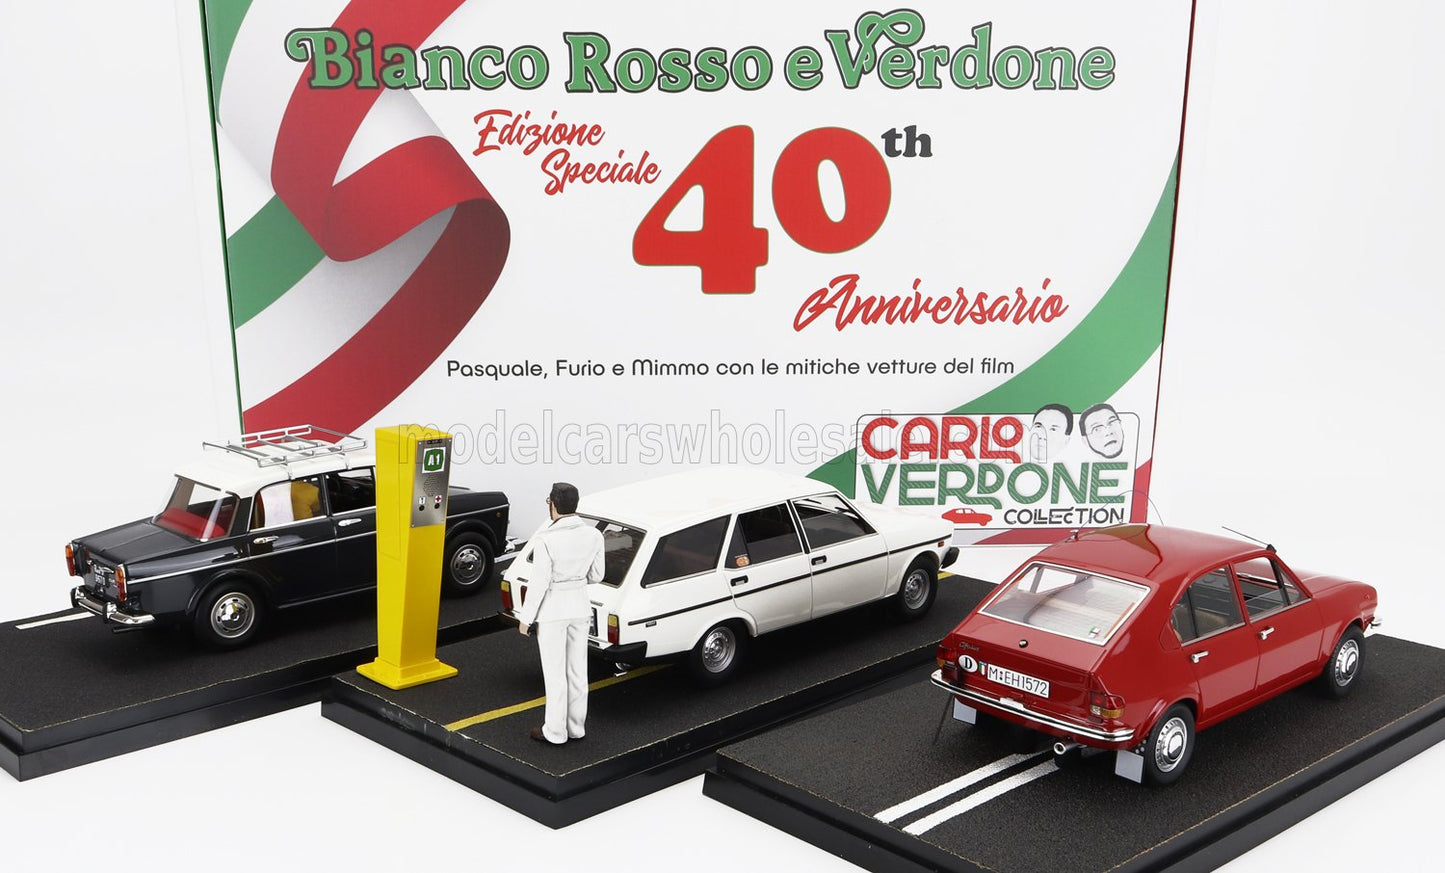 CLC-MODELS - FIAT - SET 3X CARLO VERDONE BIANCO ROSSO E VERDONE MOVIE WITH GADGET - 131 PANORAMA SW 1981 WITH FURIO ZOCCANO FIGURE AND SOS YELLOW COLUMN + 1100D WITH MIMMO FIGURE 1981 + ALFASUD WITH PASQUALE AMITRANO FIGURE 1981